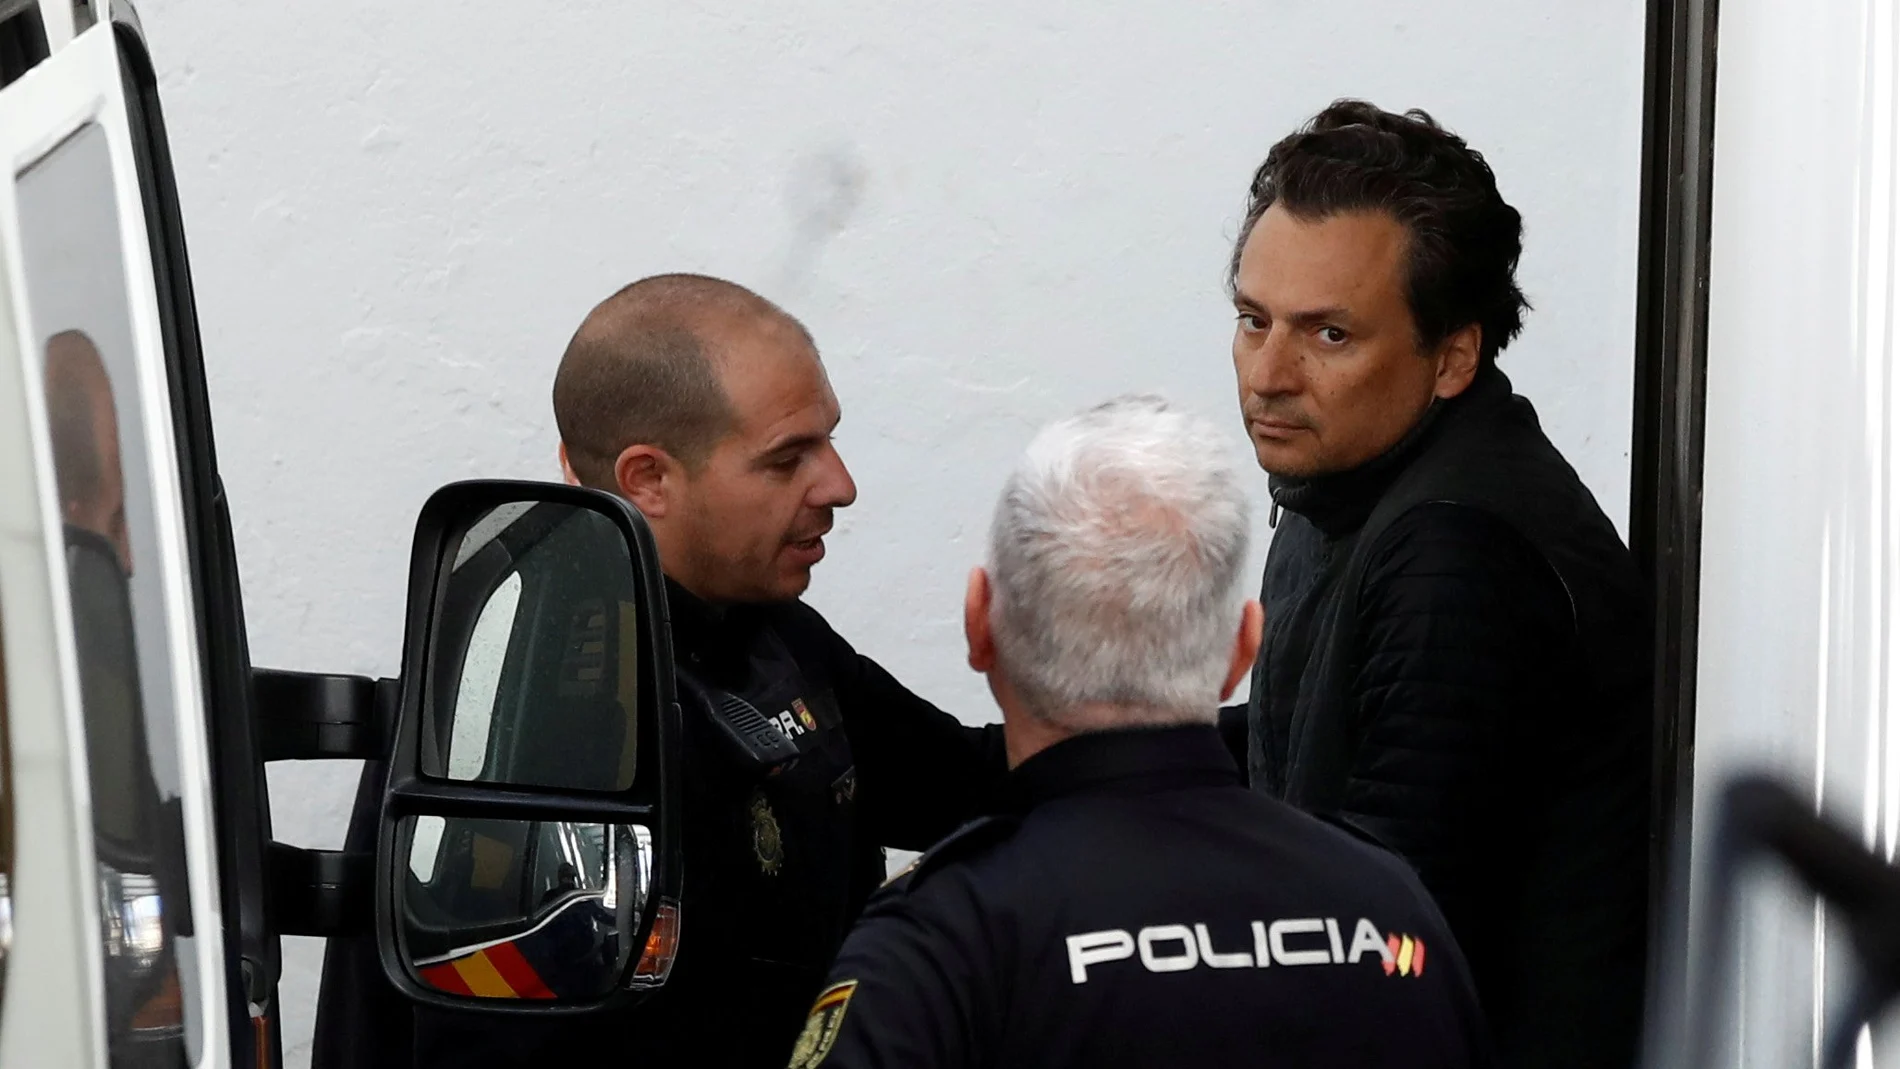 FILE PHOTO: Former chief executive of Mexico's state oil firm Pemex, Emilio Lozoya, is escorted by Spanish police officers as he leaves a court after appeared in Spain's High Court via video conference, after his detention in southern Spain on Wednesday,